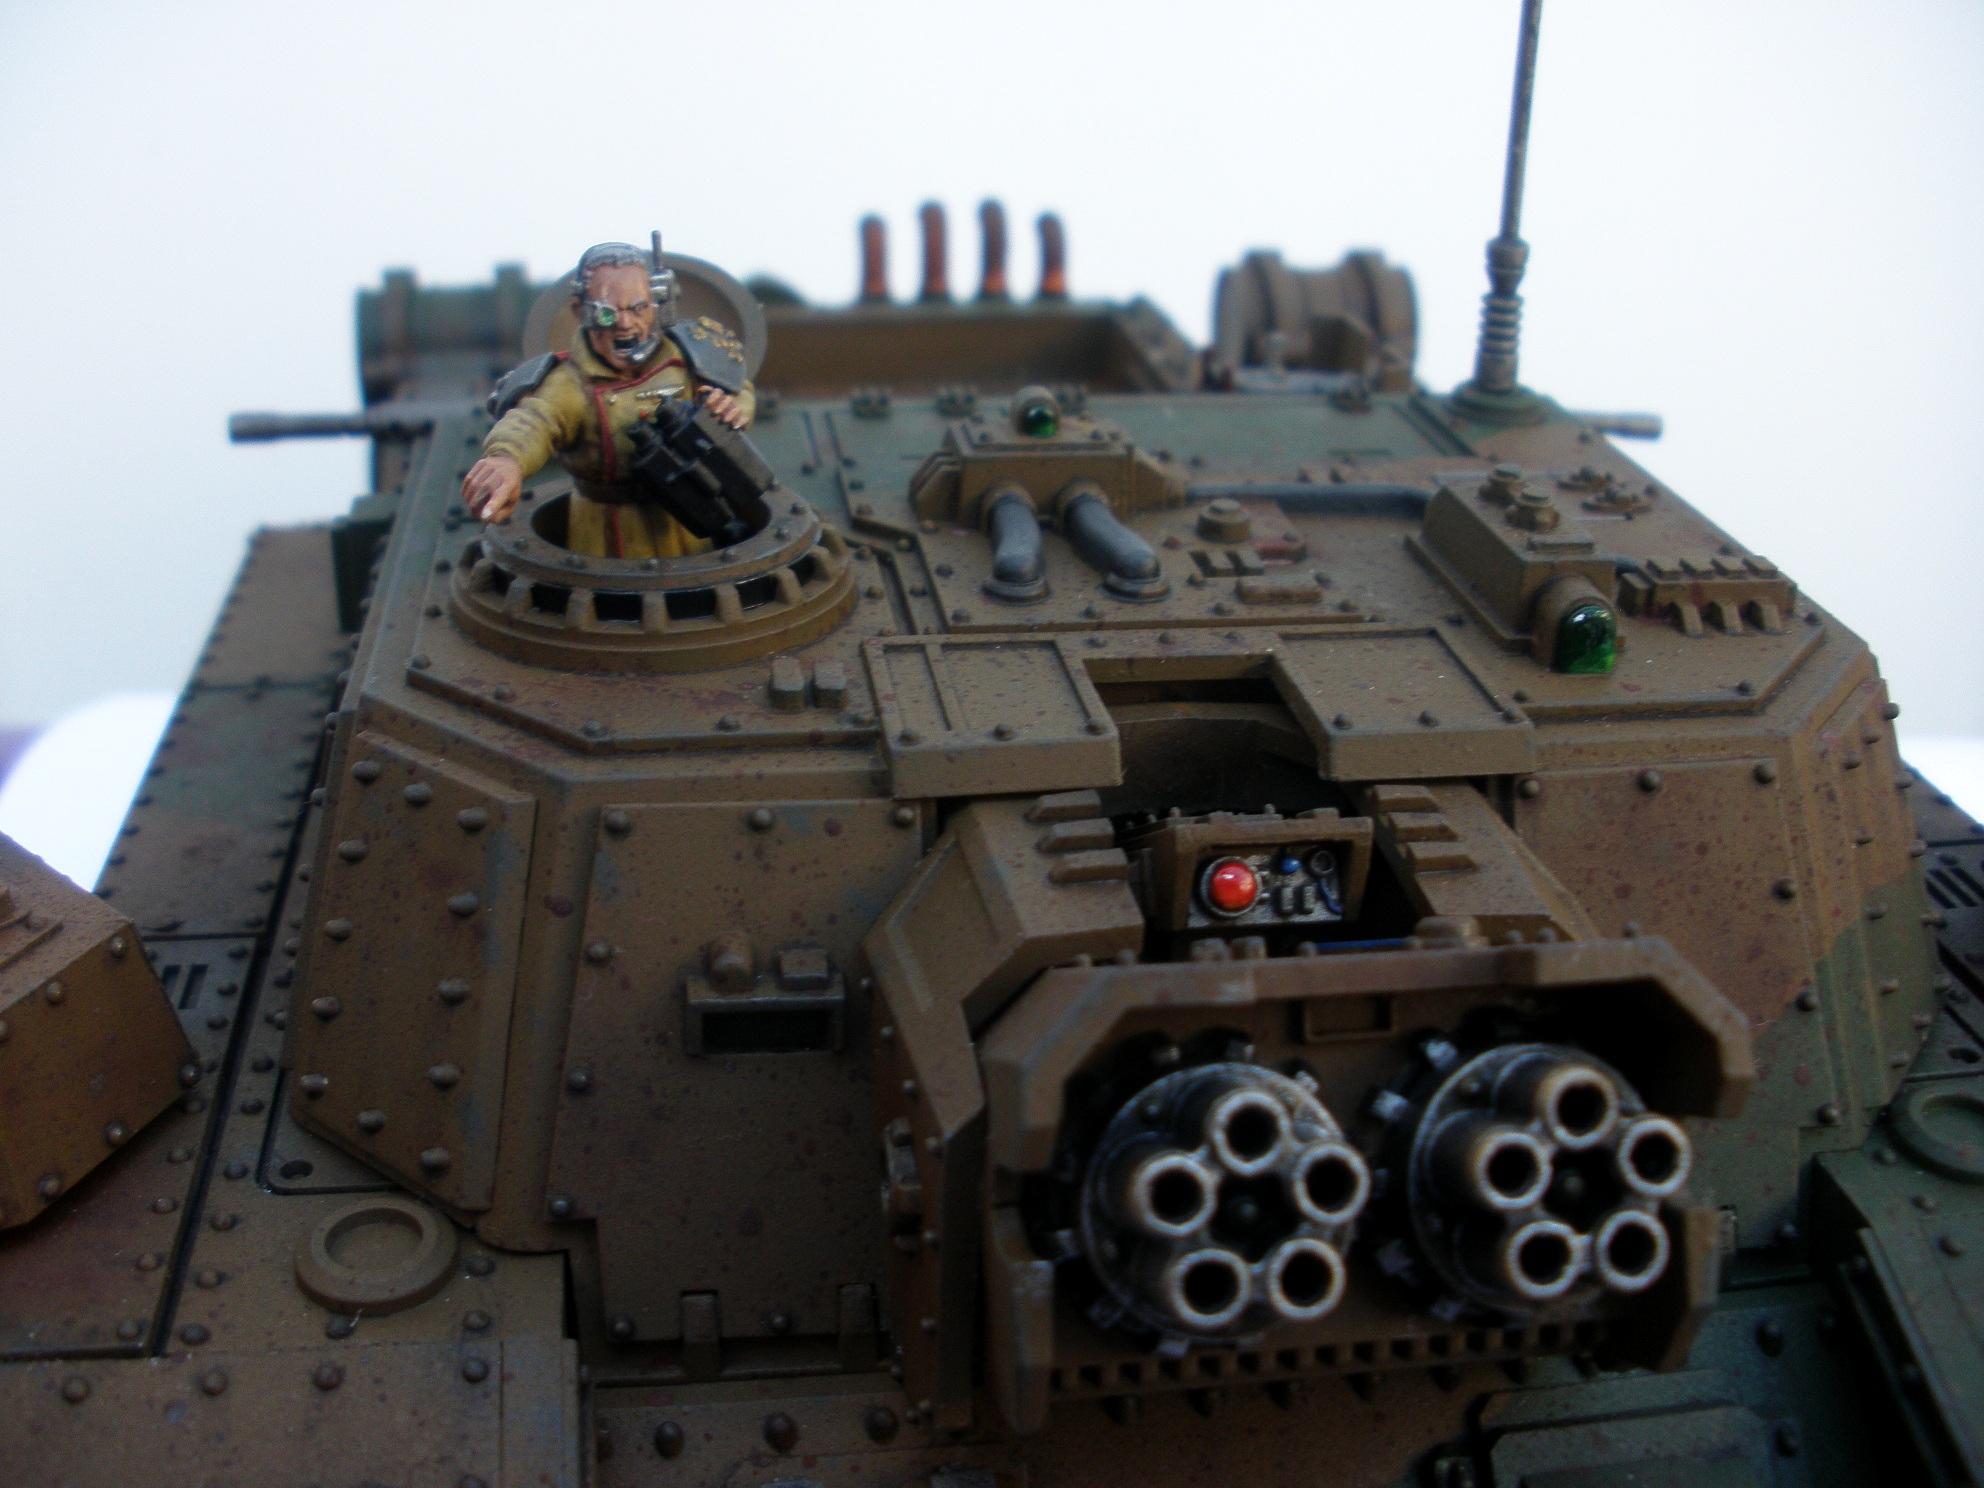 Astra Militarum, Guard, Imperial, Storm Lord, Super-heavy, Tank